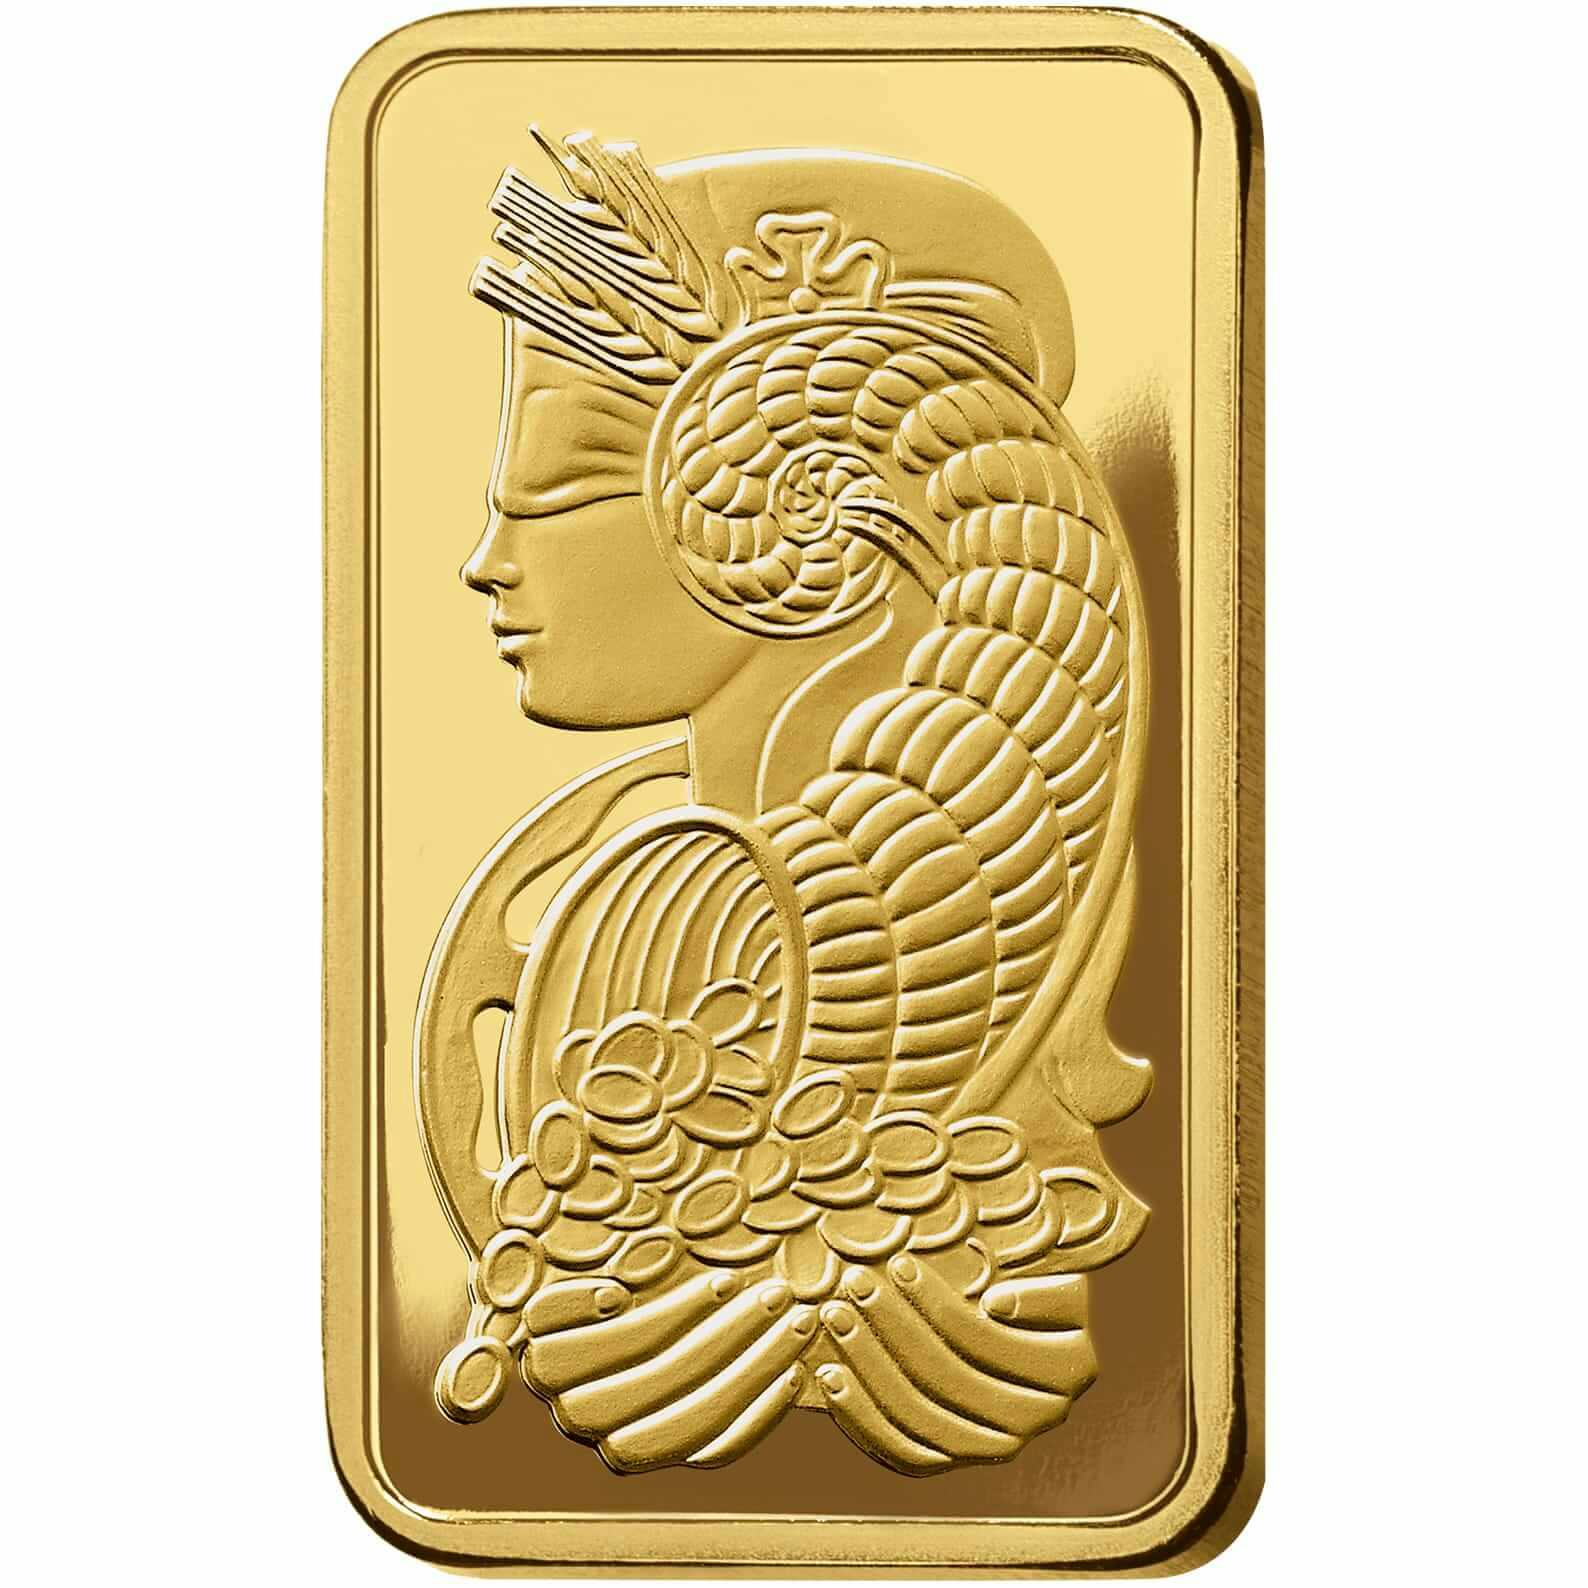 Achat d'or, 2 tolas d'or pur Lady Fortuna - PAMP Suisse - Front Veriscan